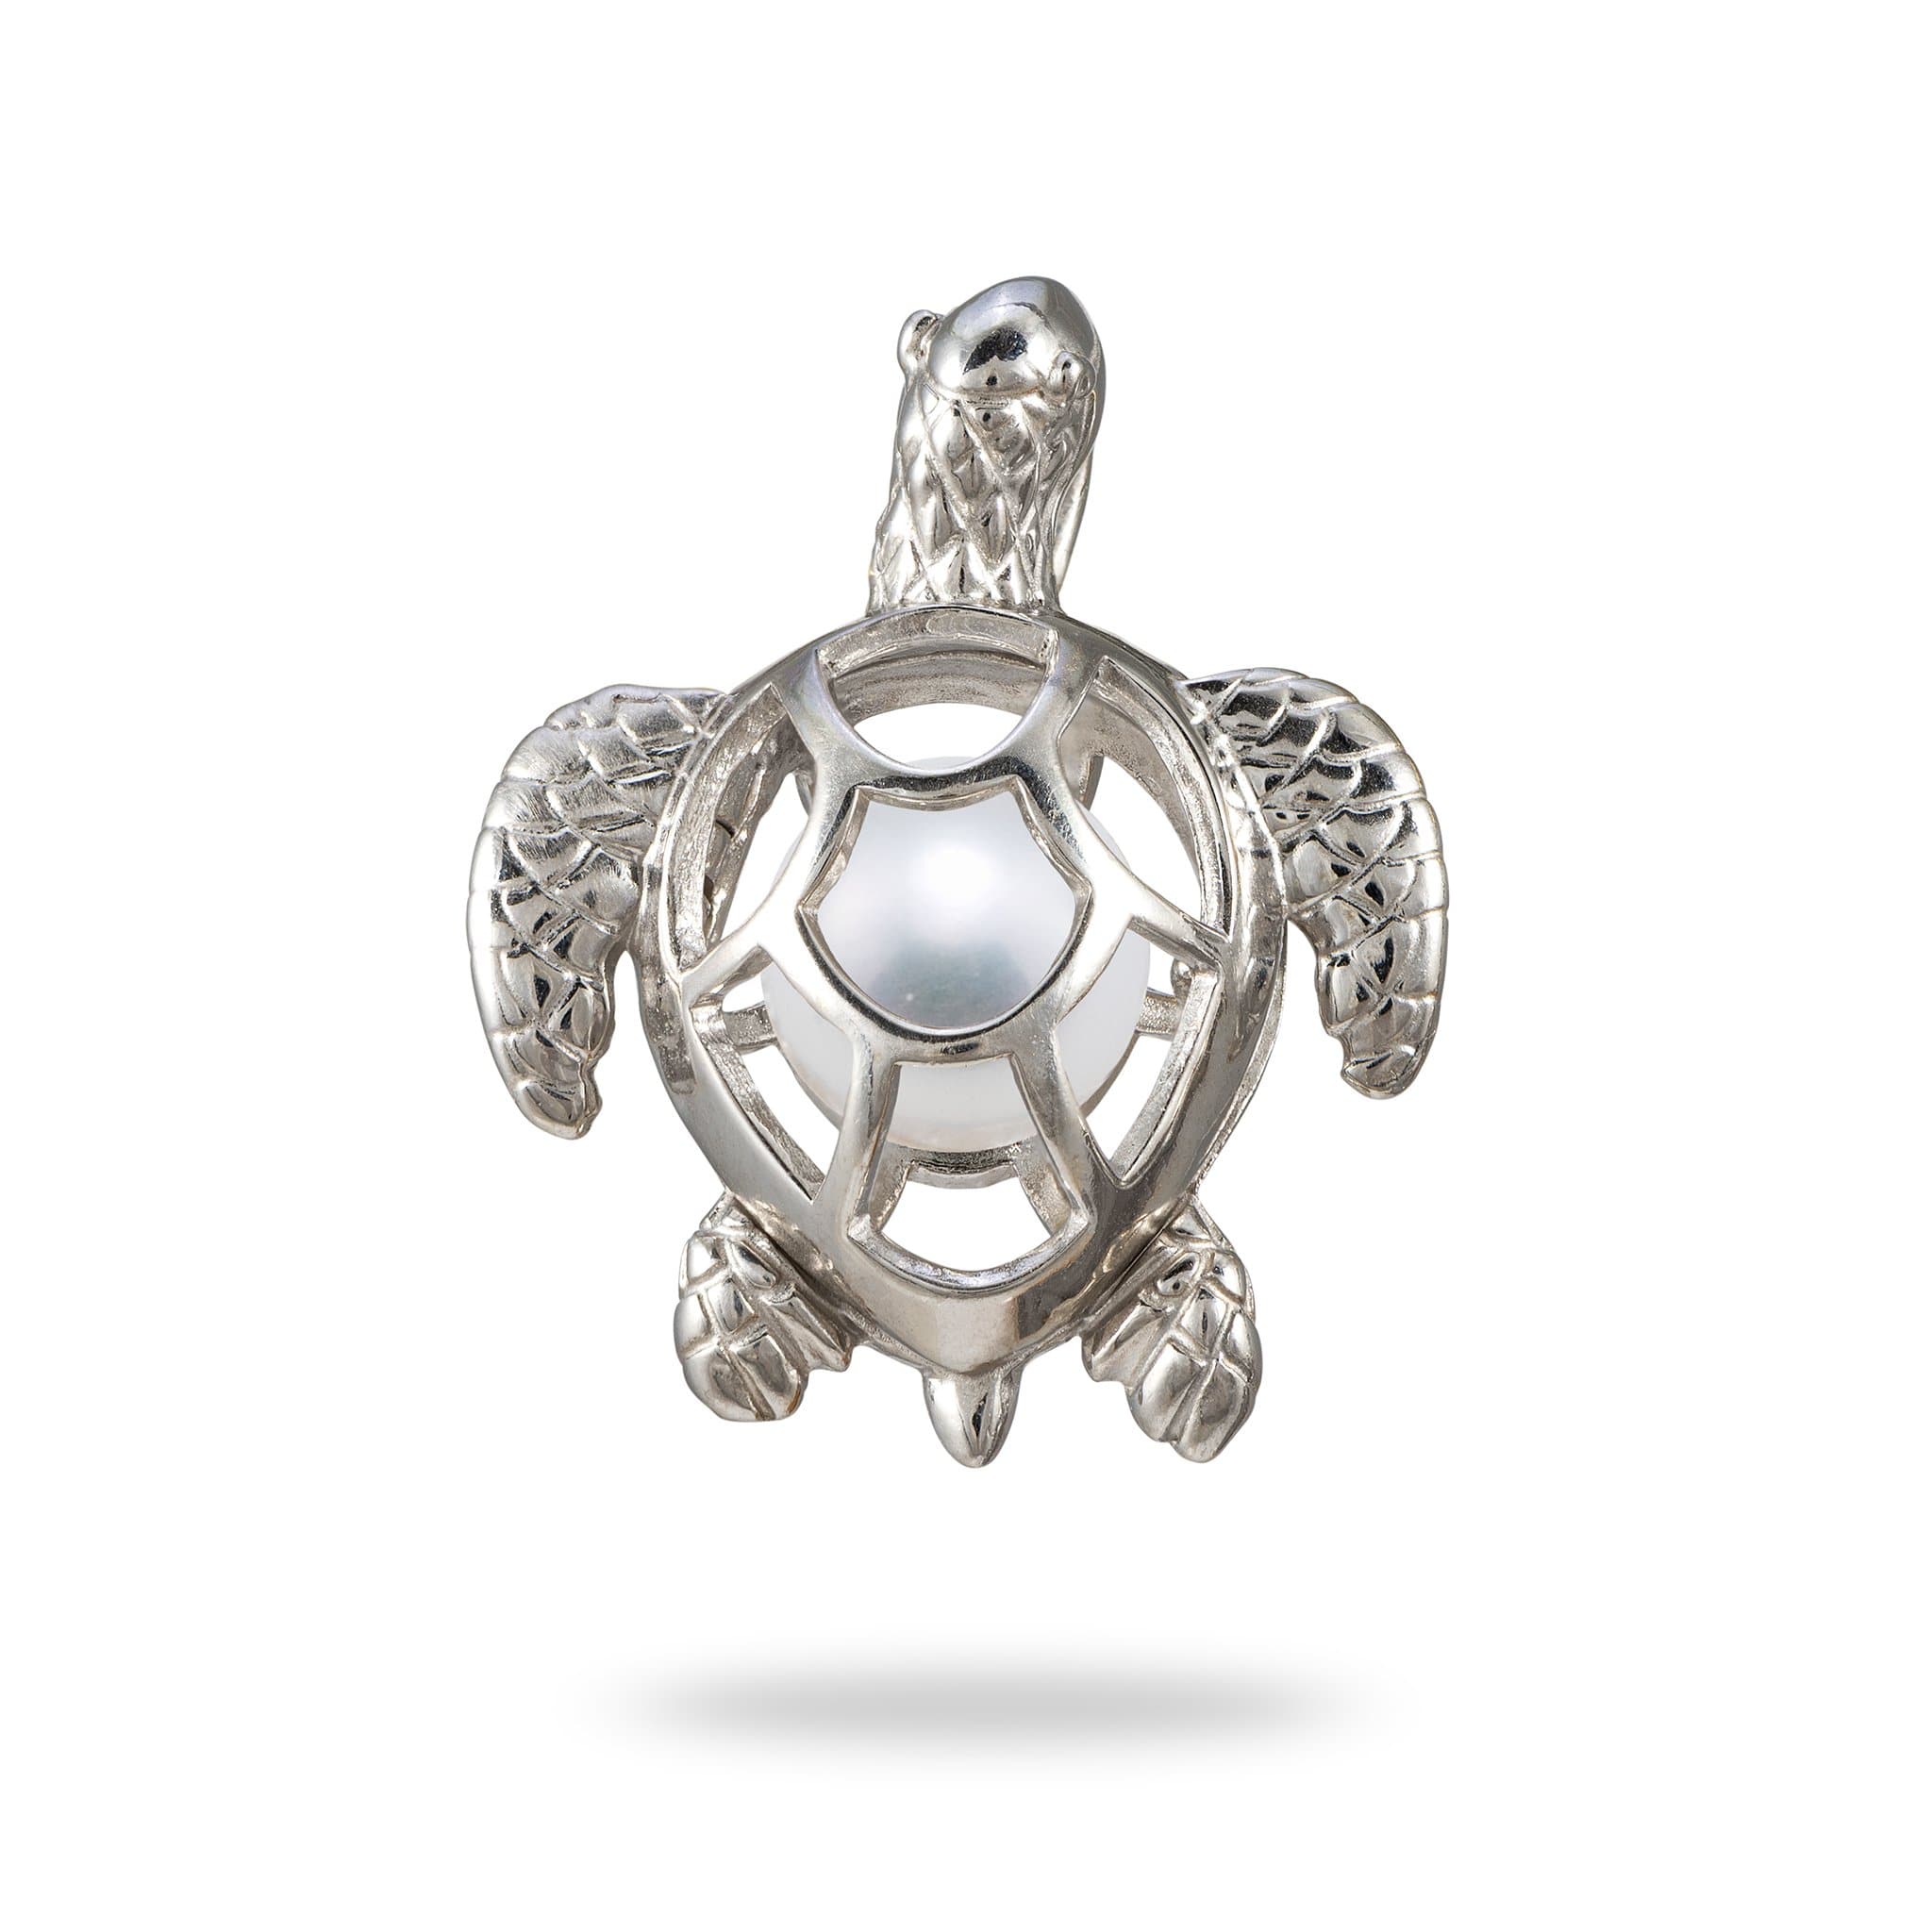 Honu Cage Pendant Mounting in Sterling Silver with White Pearl - Maui Divers Jewelry